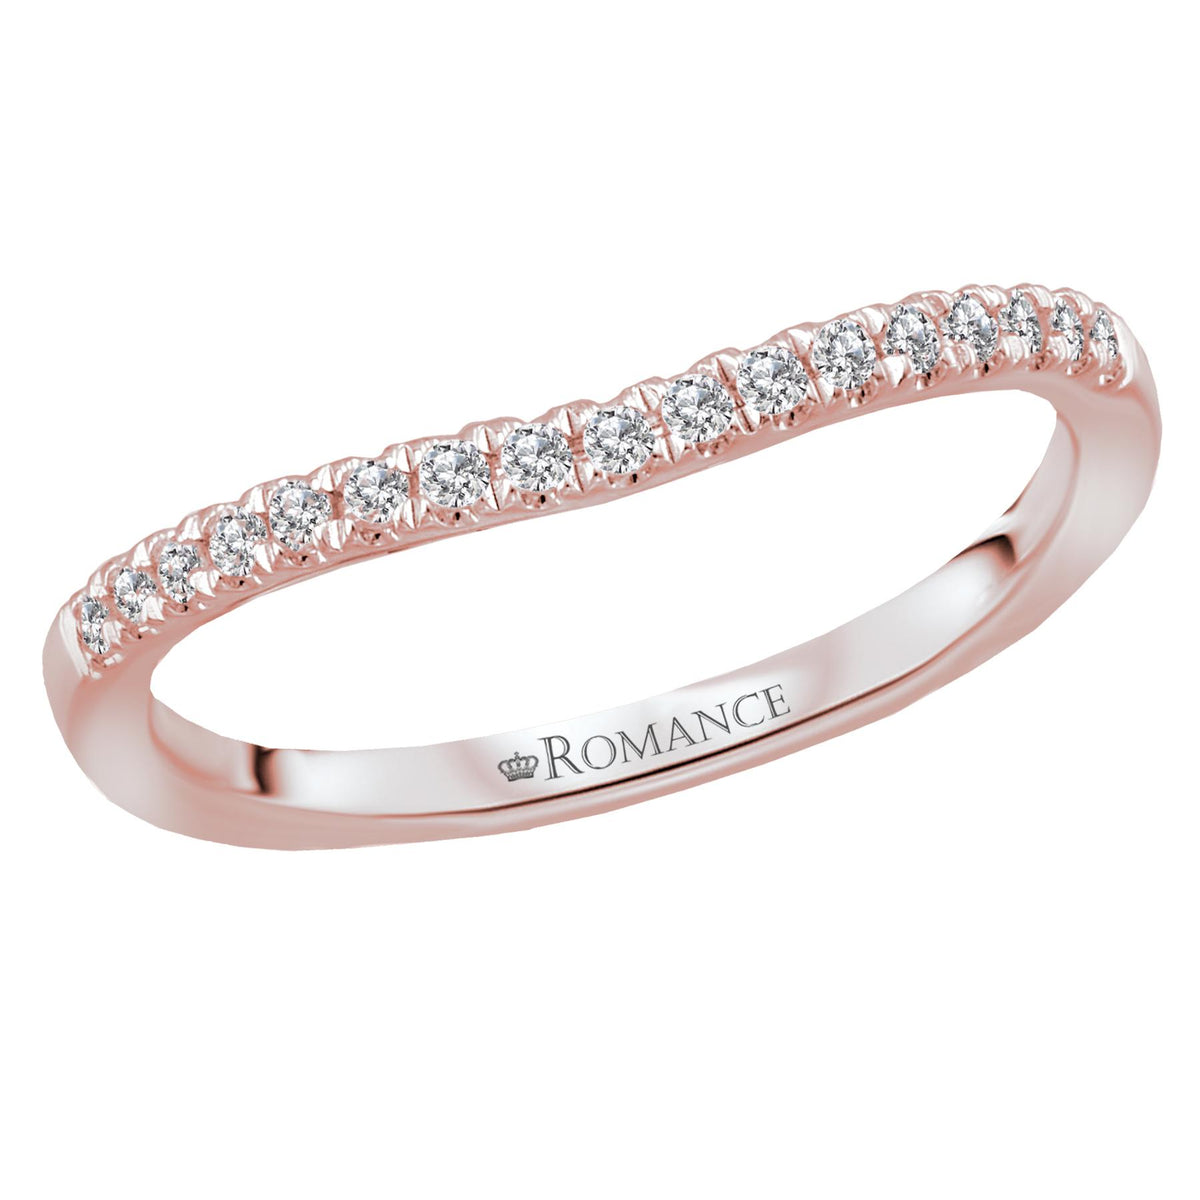 14KT Gold 1/7 CTW Round Diamond Curved 17 Stone Band Rose / 4,Rose / 4.5,Rose / 5,Rose / 5.5,Rose / 6,Rose / 6.5,Rose / 7,Rose / 7.5,Rose / 8,Rose / 8.5,Rose / 9